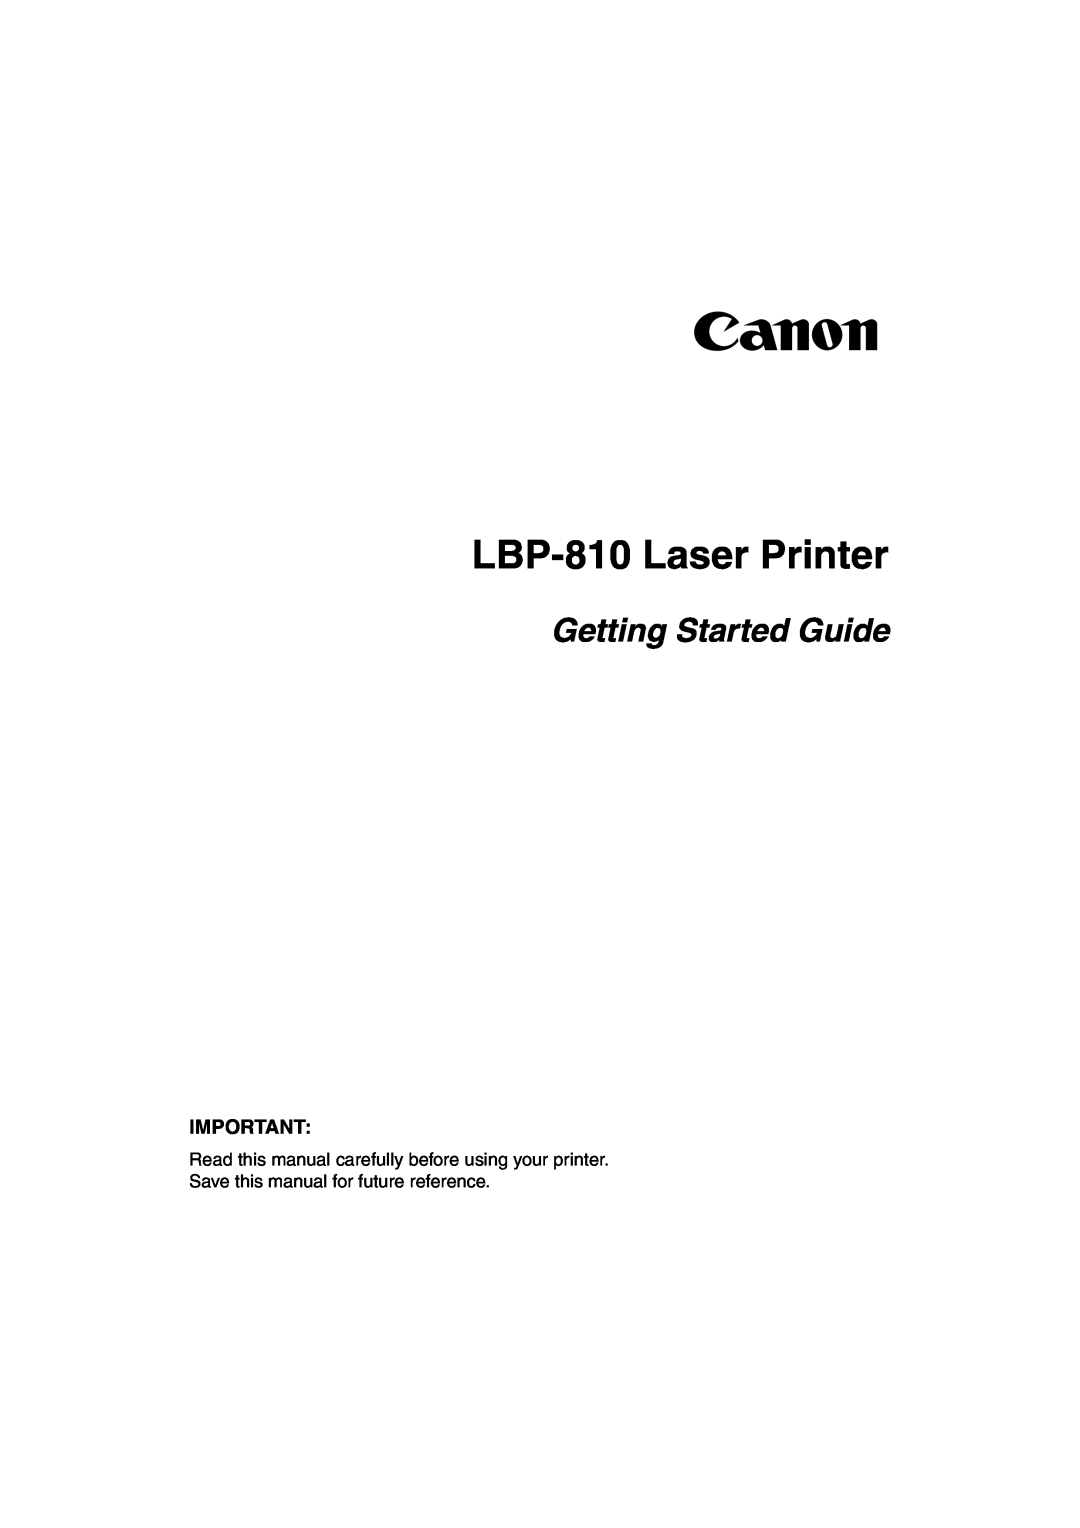 Canon manual LBP-810Laser Printer, Getting Started Guide 